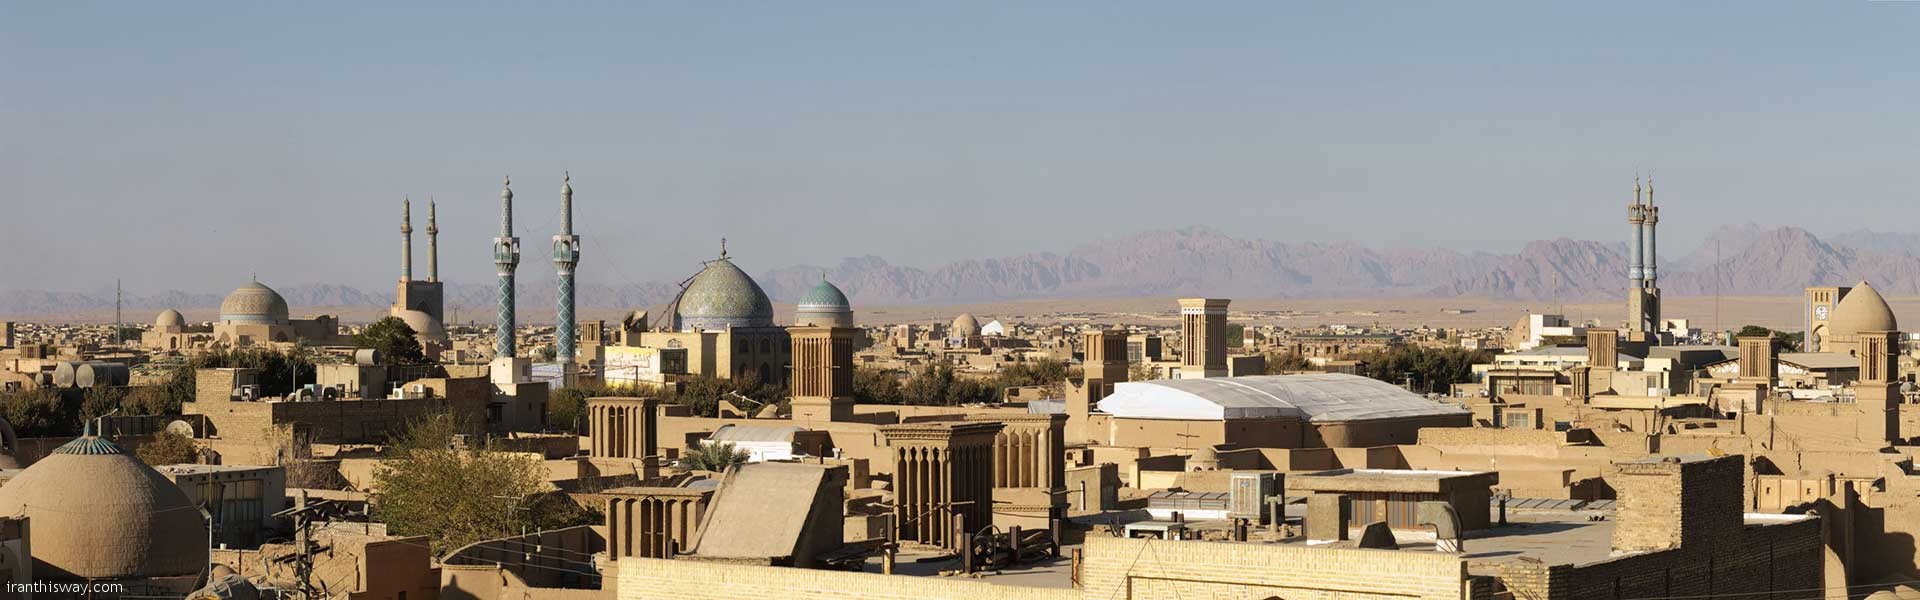 The capital of Yazd province has a unique Persian architecture. The historical city is nicknamed the city of wind catchers because of its ancient Persian wind catchers.